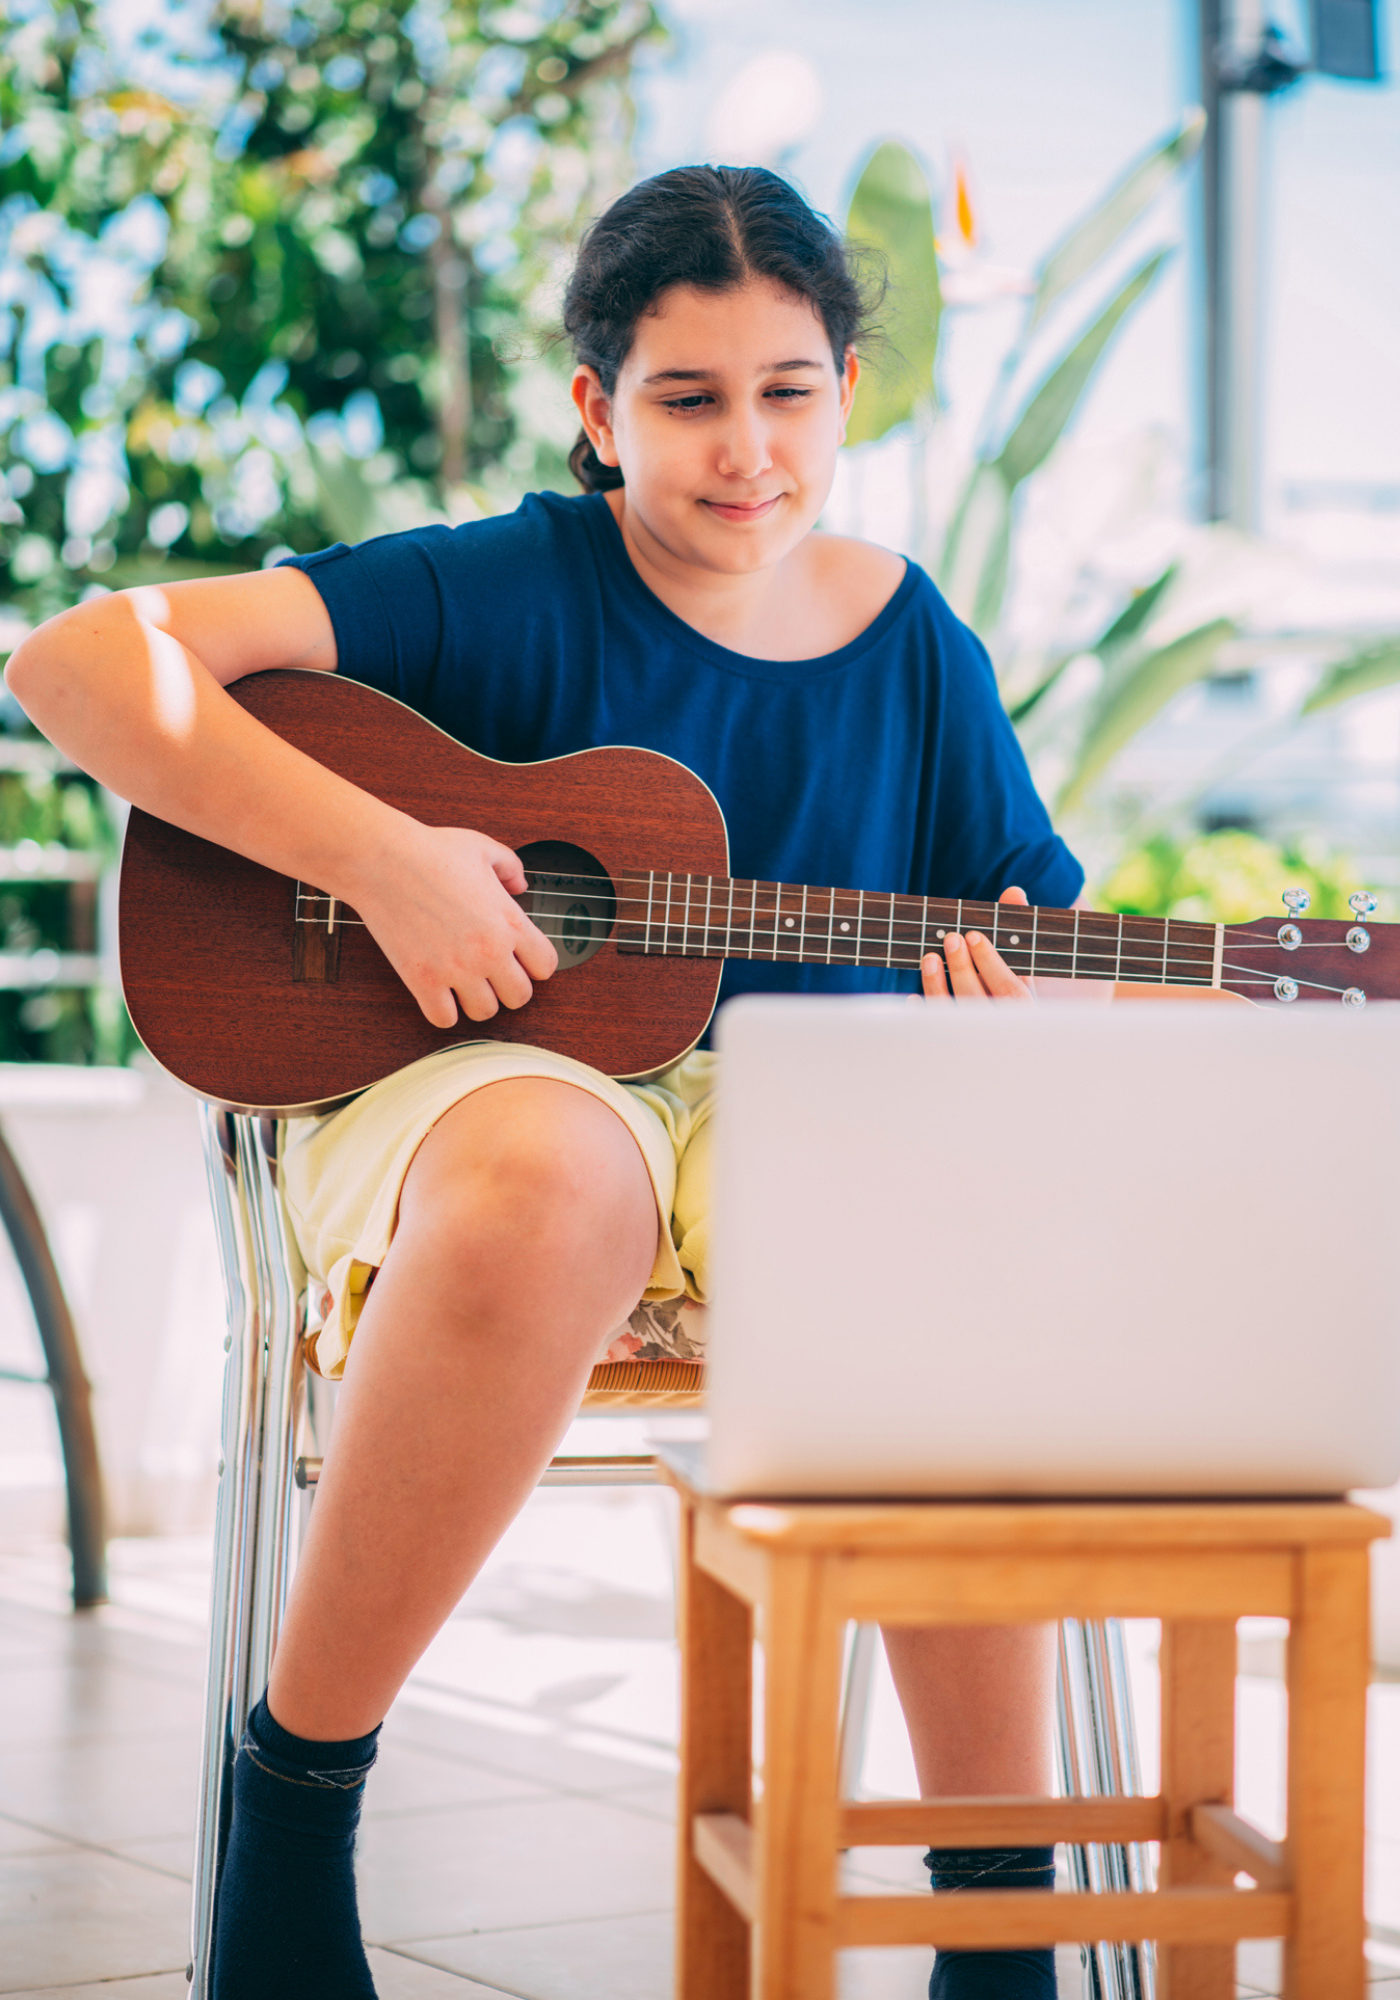 Adolescent learns how to play guitar in front of a laptop